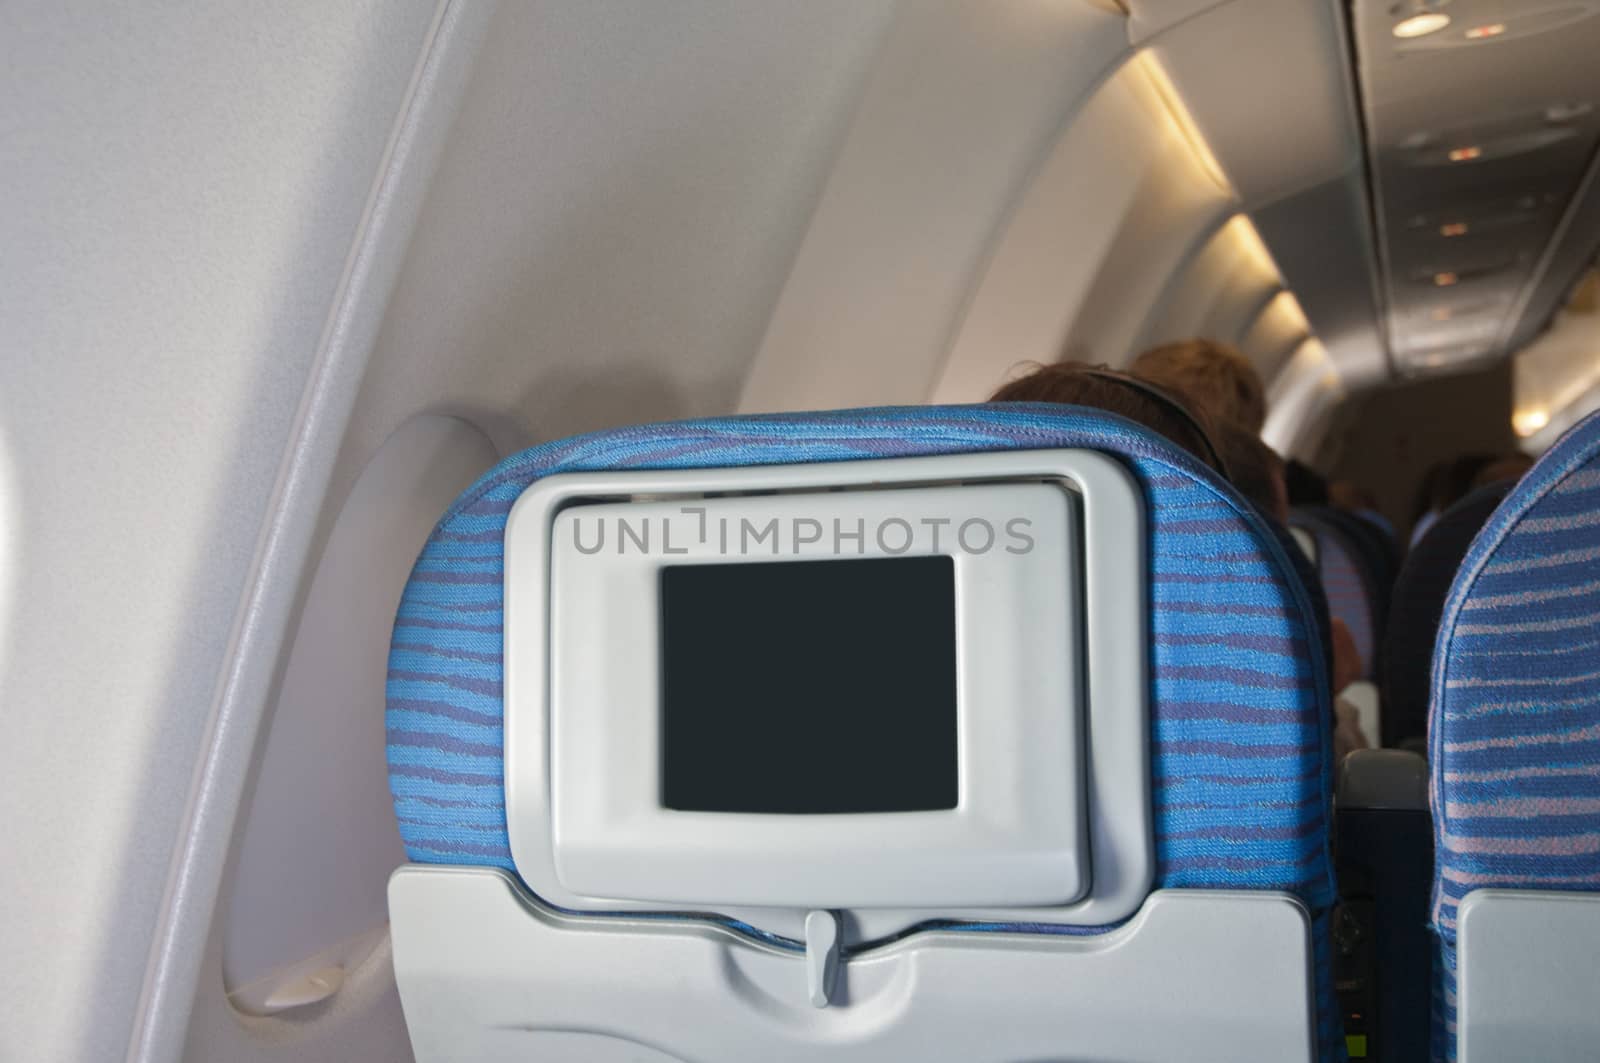 Inflight personal screen for window seat